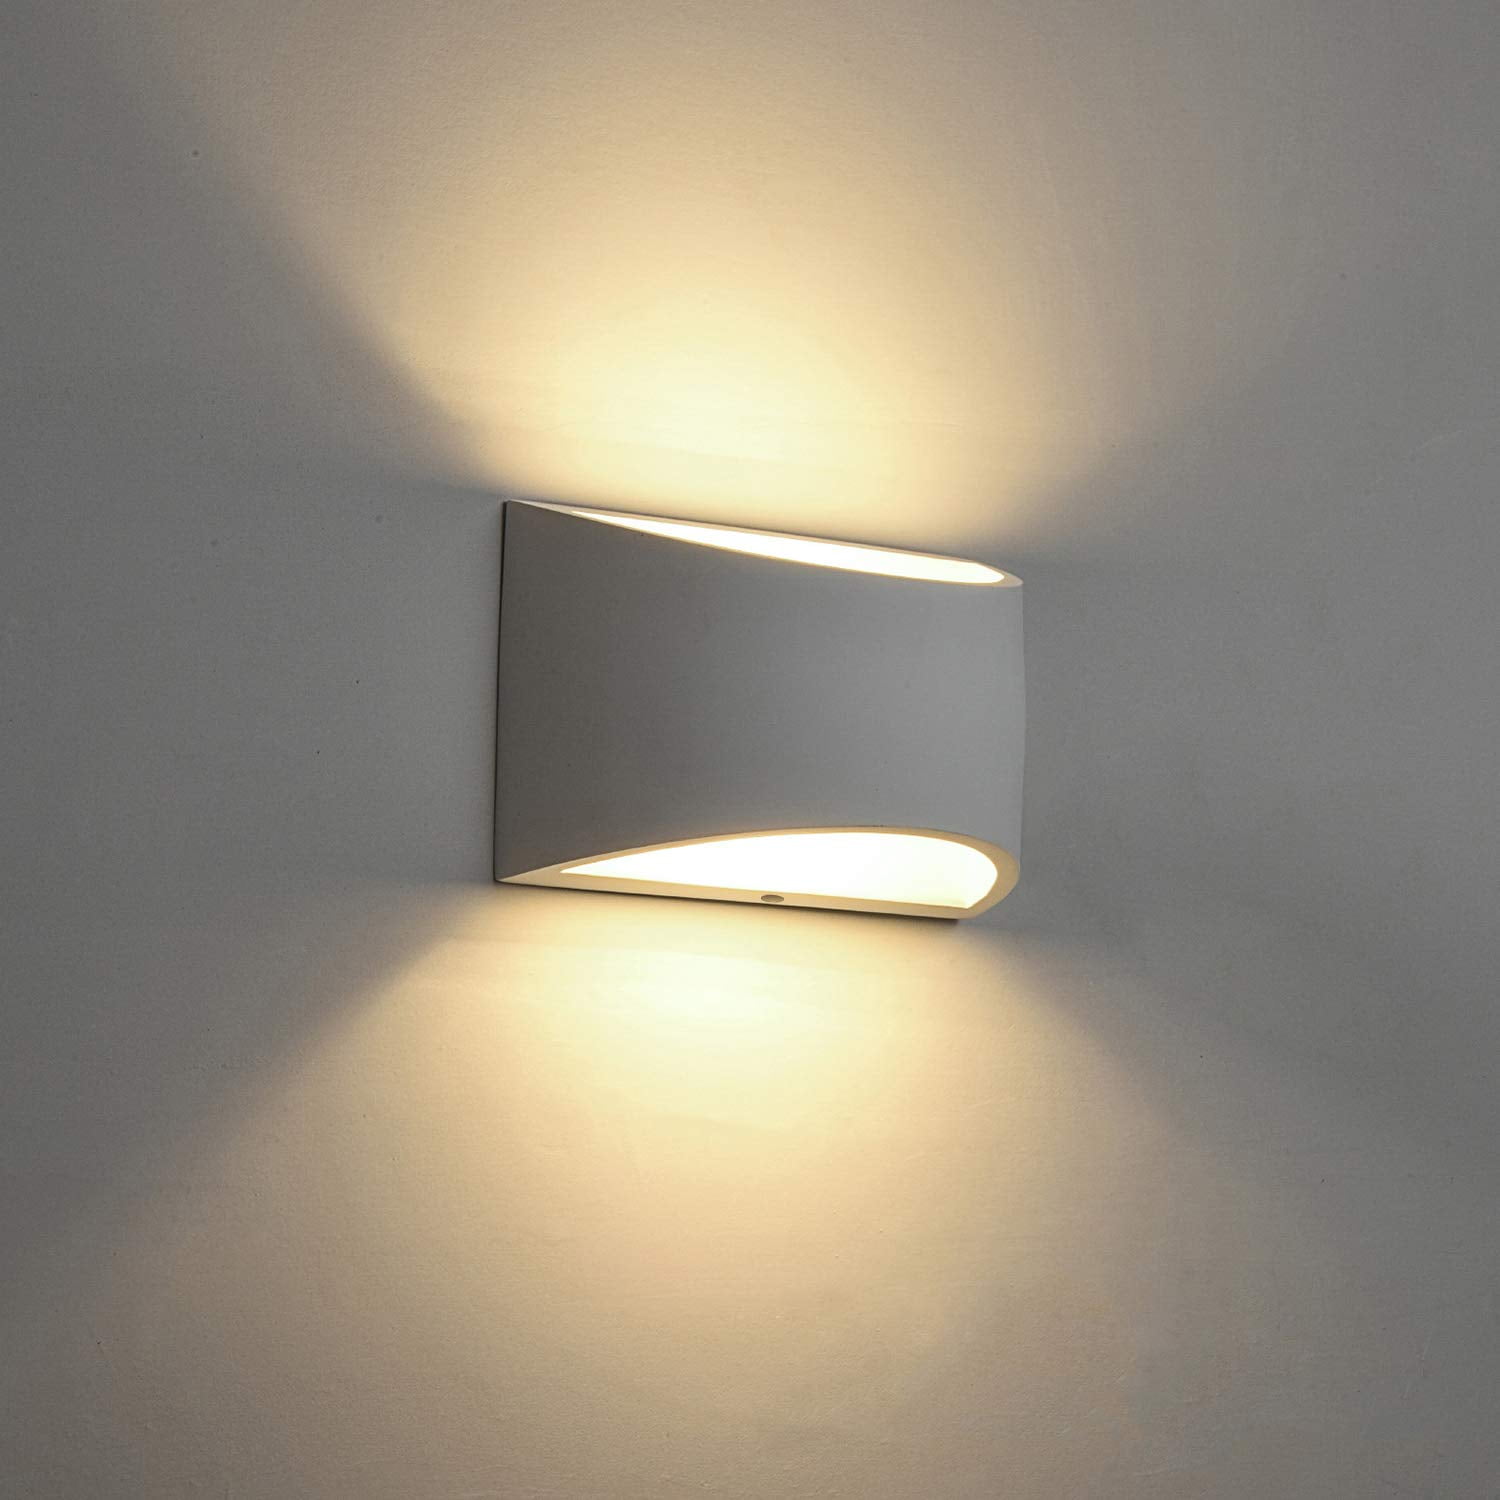 Warm Light excl 2 GU 10 Bulbs 580lm 3000 k 5W 220V Bedroom for Hallway paintable Kitchen Ultra Modern Design Simple Wall Light up and Down White Cylindrical Plaster Frame Office Living Room